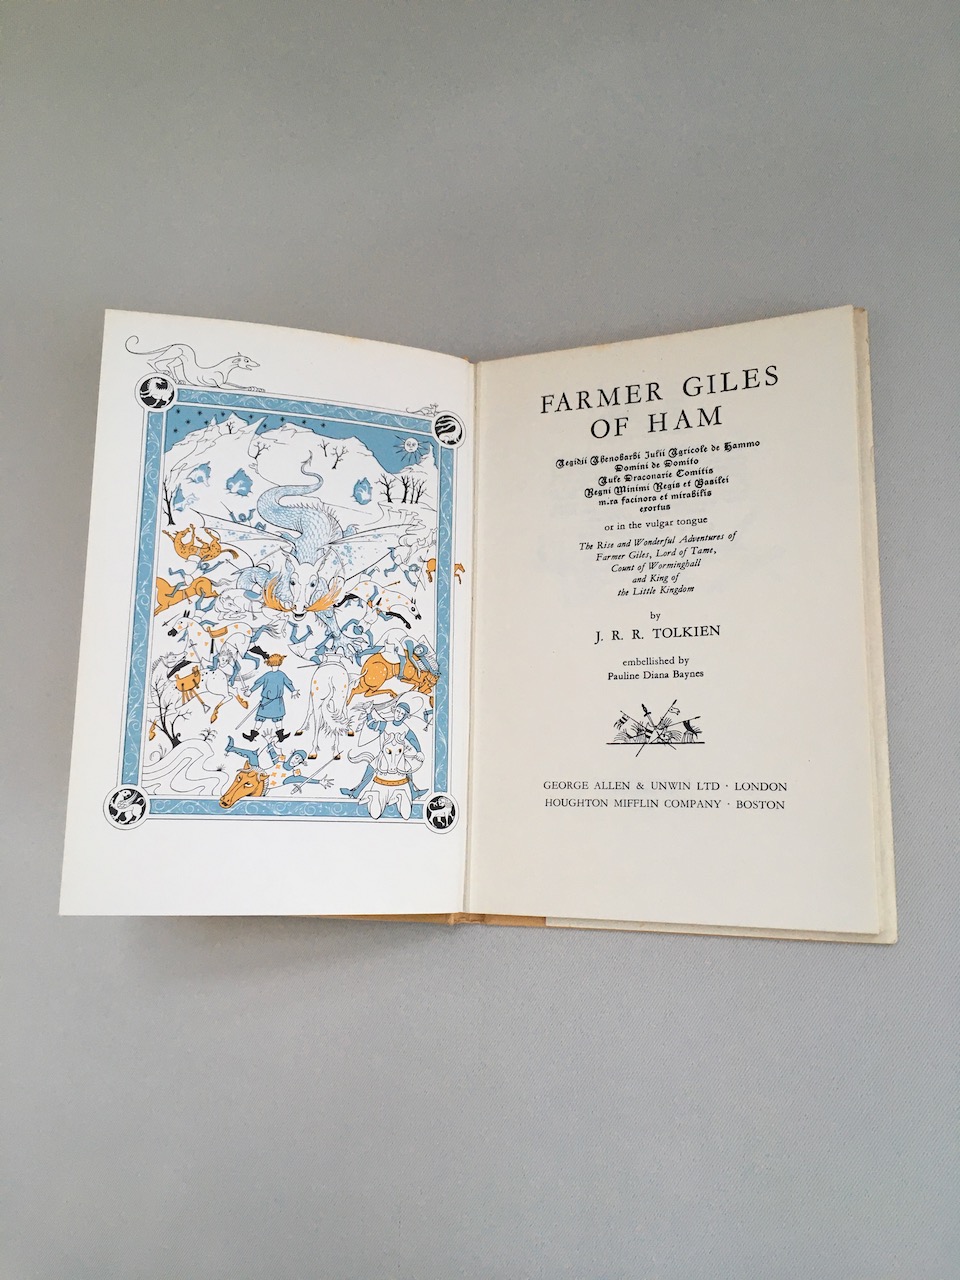 
Farmer Giles of Ham, The Rise and Wonderful Adventures of Farmer Giles, 7th impression from 1970 15